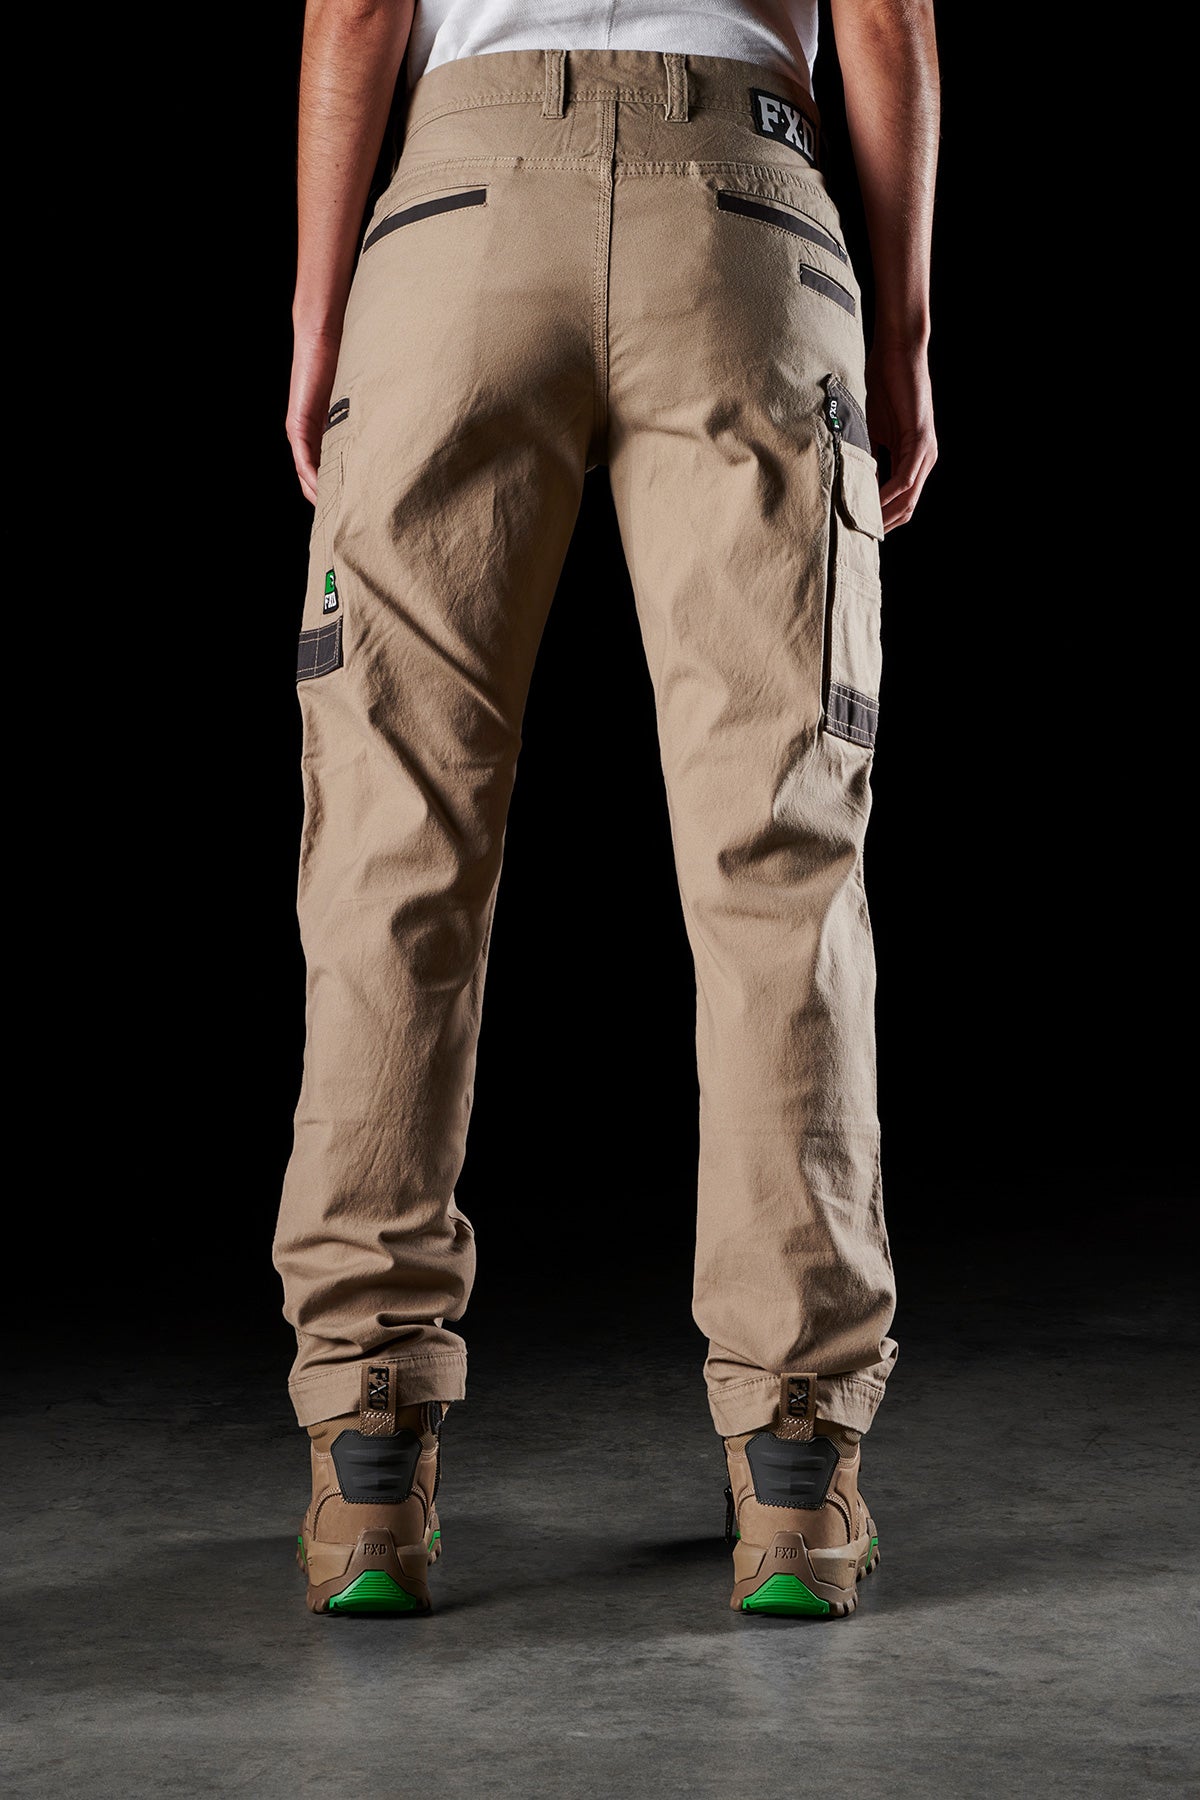 FXD WP-1™ Utility Work Pant from Highlands Workwear